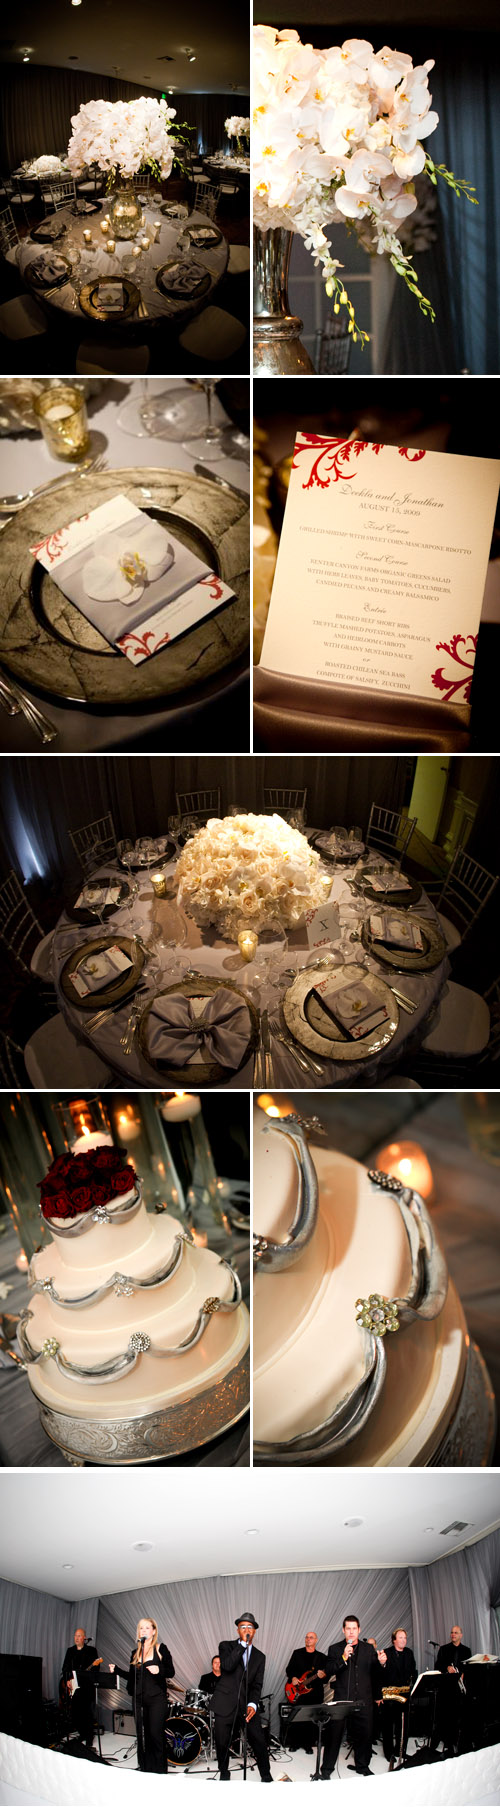 Luxurious vintage meets modern, silver and white Hotel Bel Air wedding reception designed by Kristin Banta Events, images by David Michael Photography